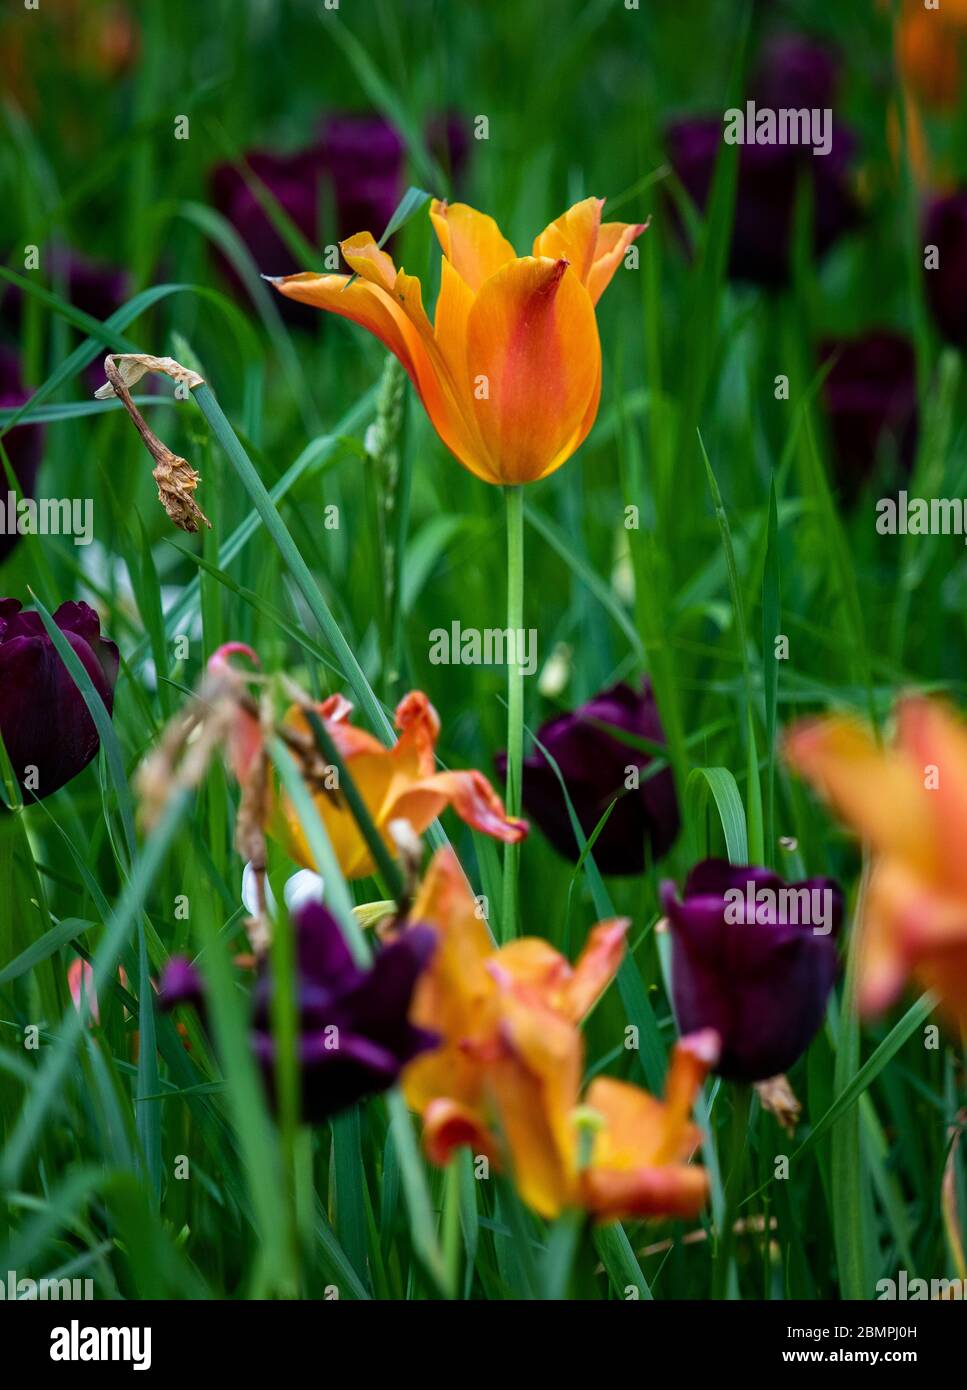 An orange tulip stands tall amoung long grass and other purple and orange tulips. Stock Photo